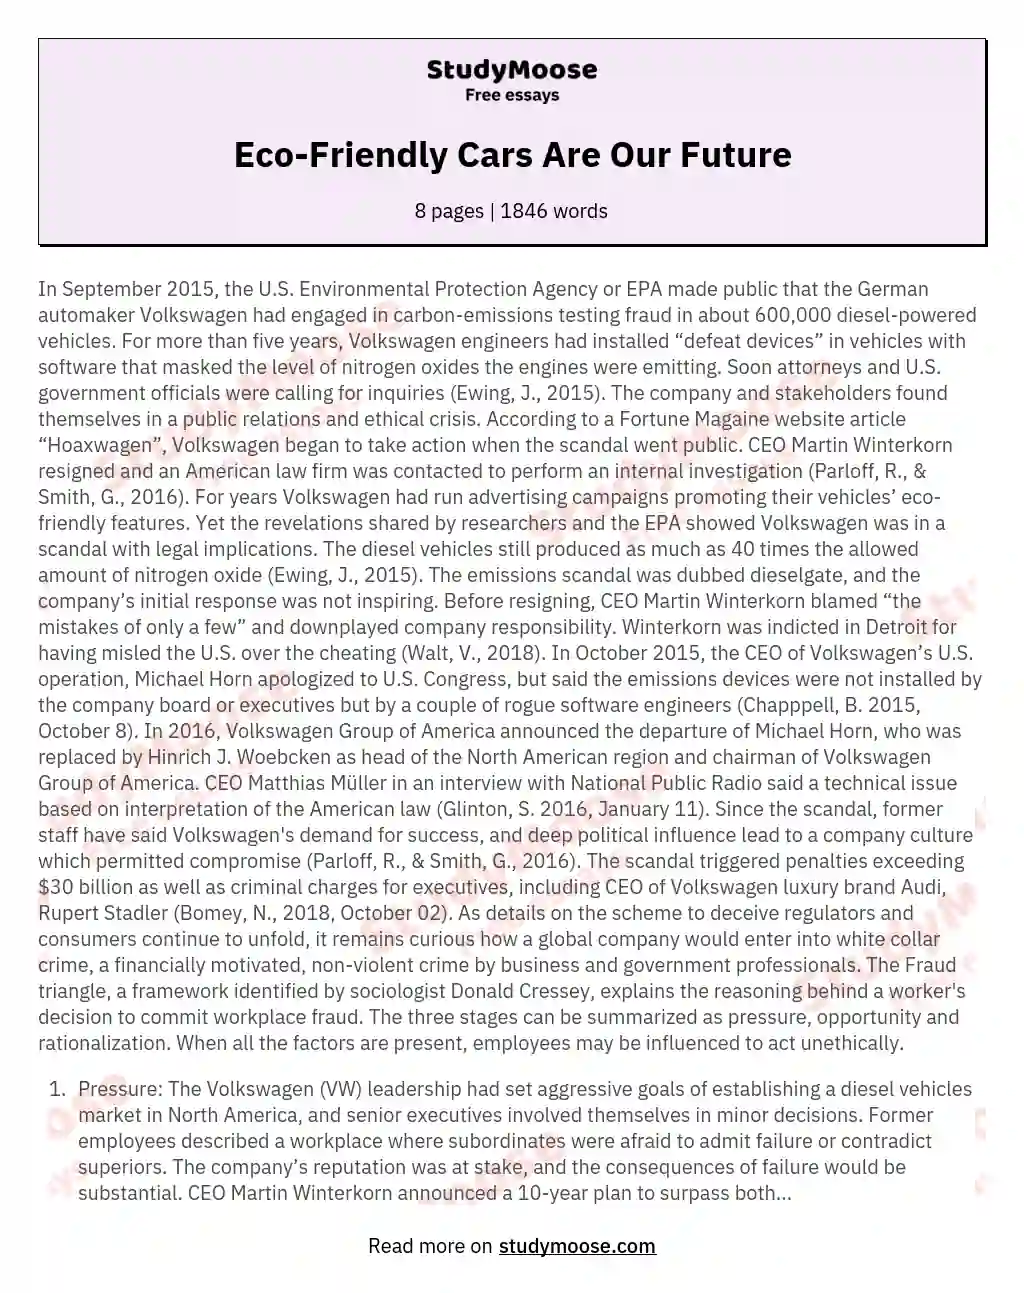 Eco-Friendly Cars Are Our Future essay